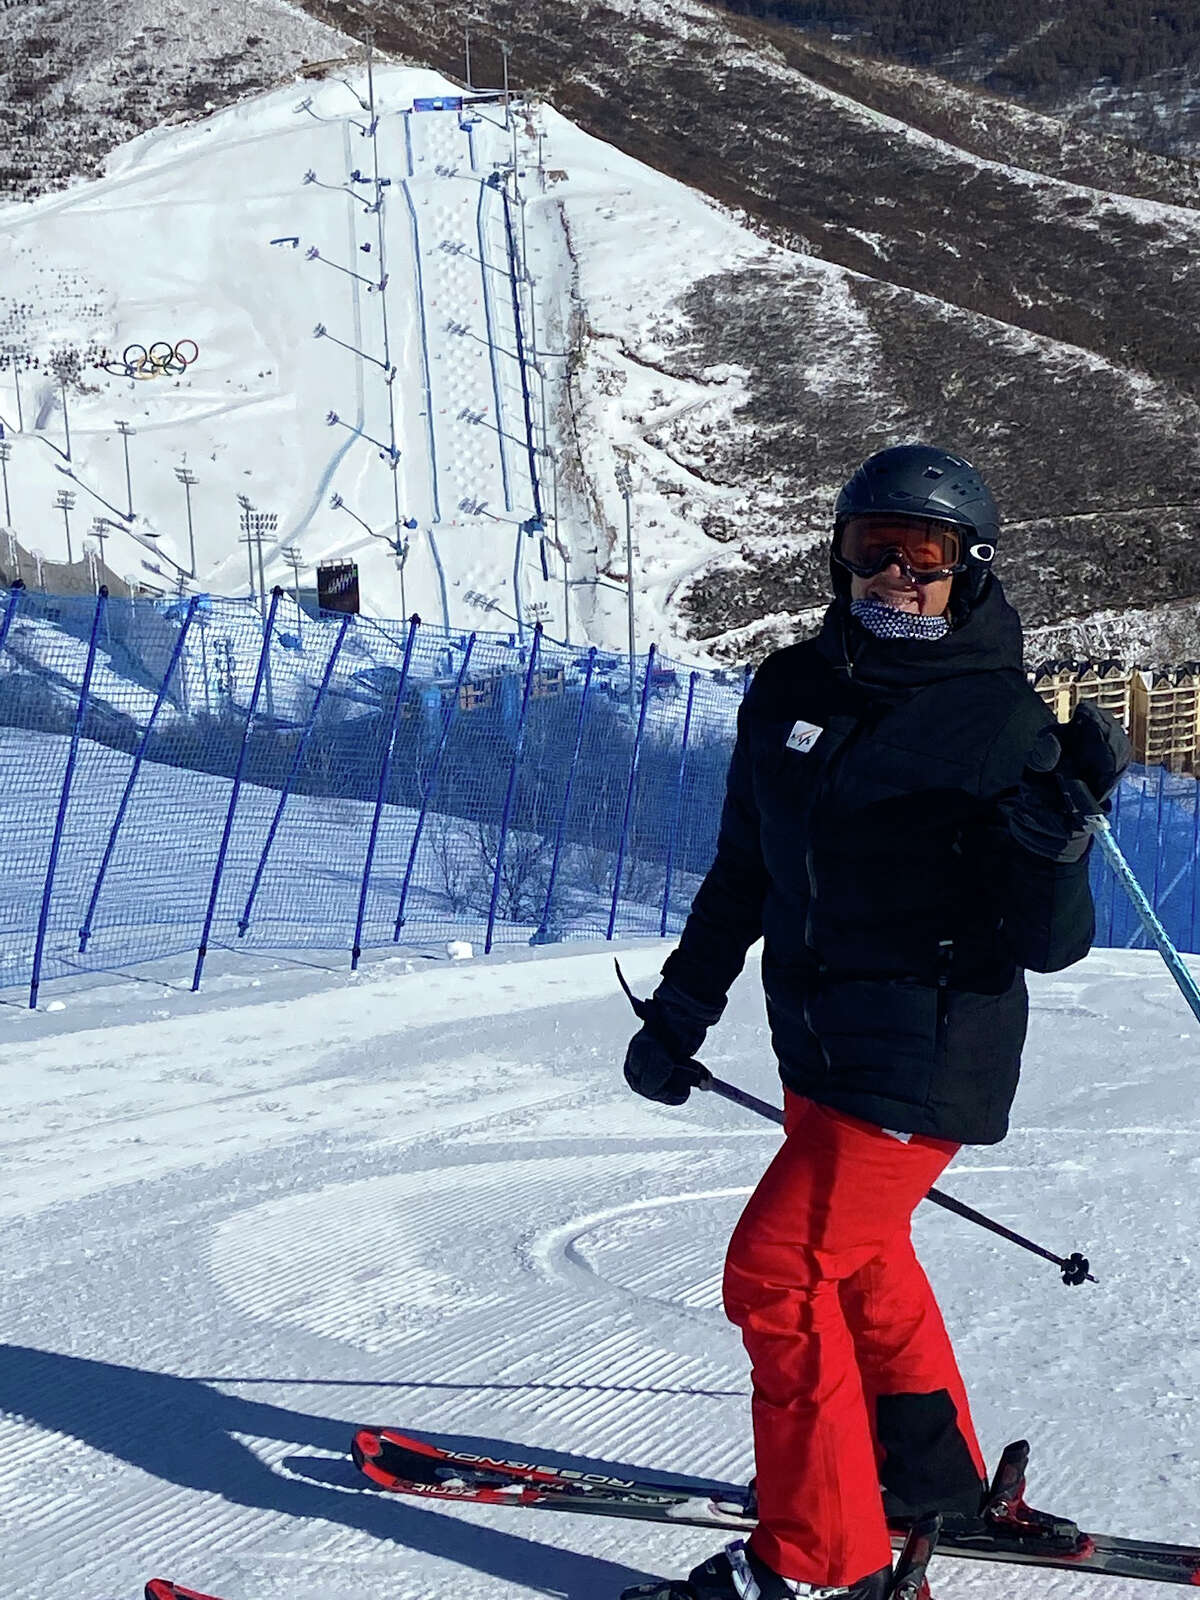 Sarah Simson of Niskayuna was a judge in freestyle skiing in Zhangjiakou during the 2022 Beijing Olympic Games. Here she is skiing above the half pipe and slope style courses. The mogul course and rings are in the background.